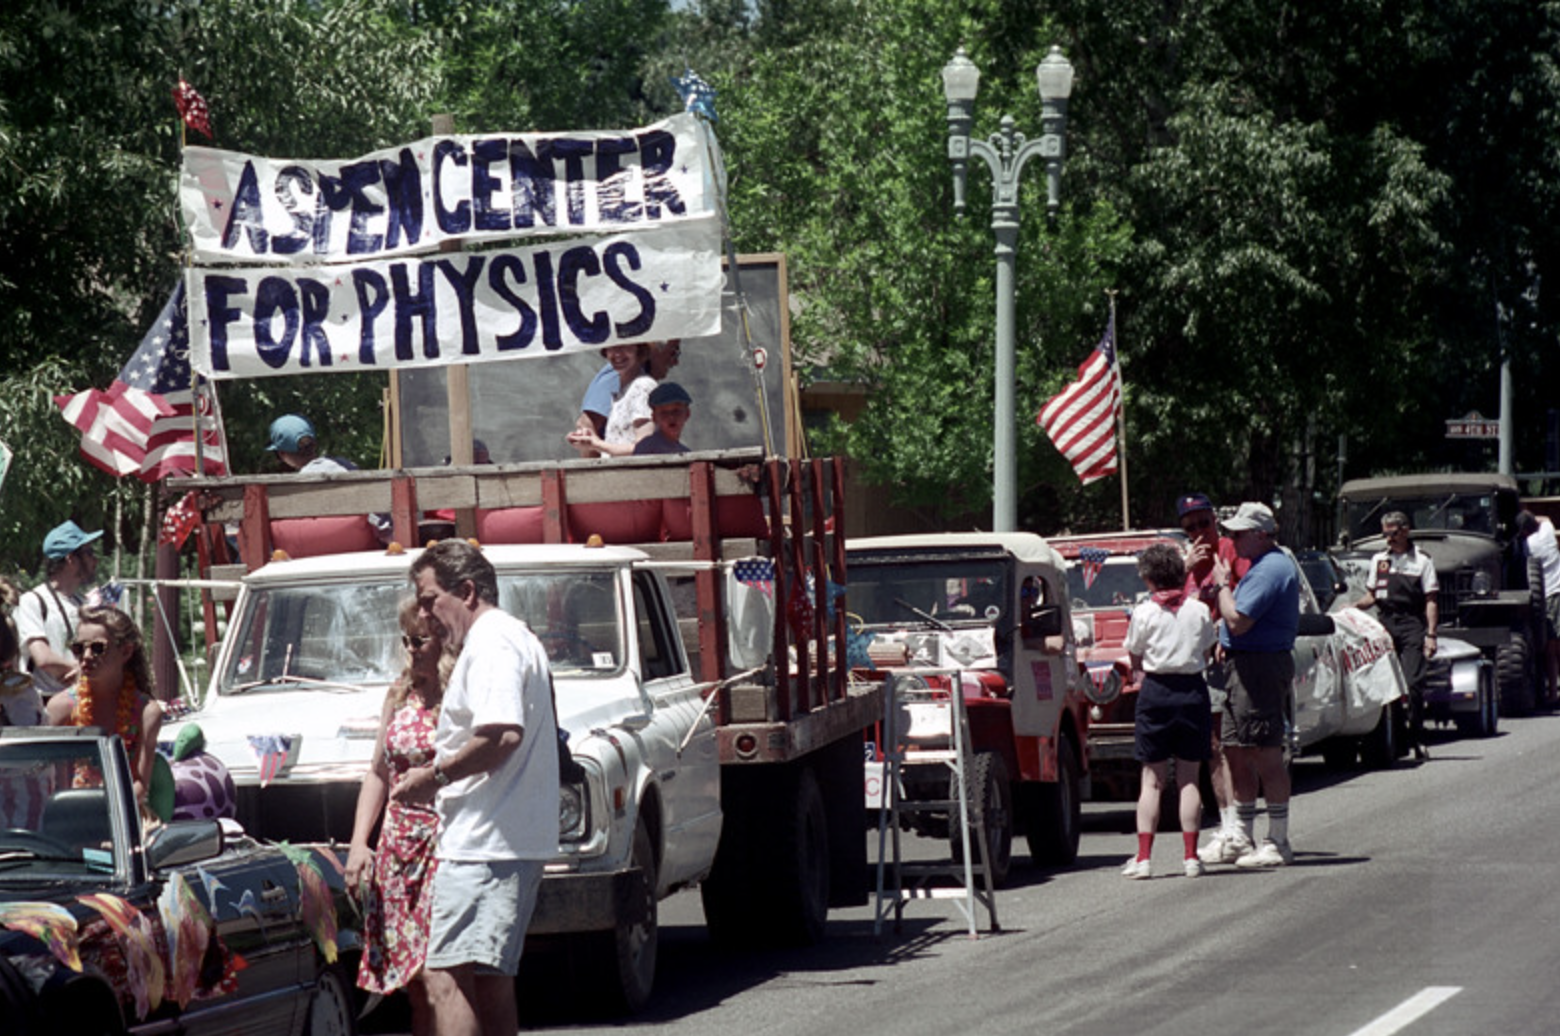 4th of July Parade on Main Street in Aspen, 1997. Aspen Center for Physics (ACP) parade participants. Part of an archival project, featuring the photographs of Nick Dewolf.